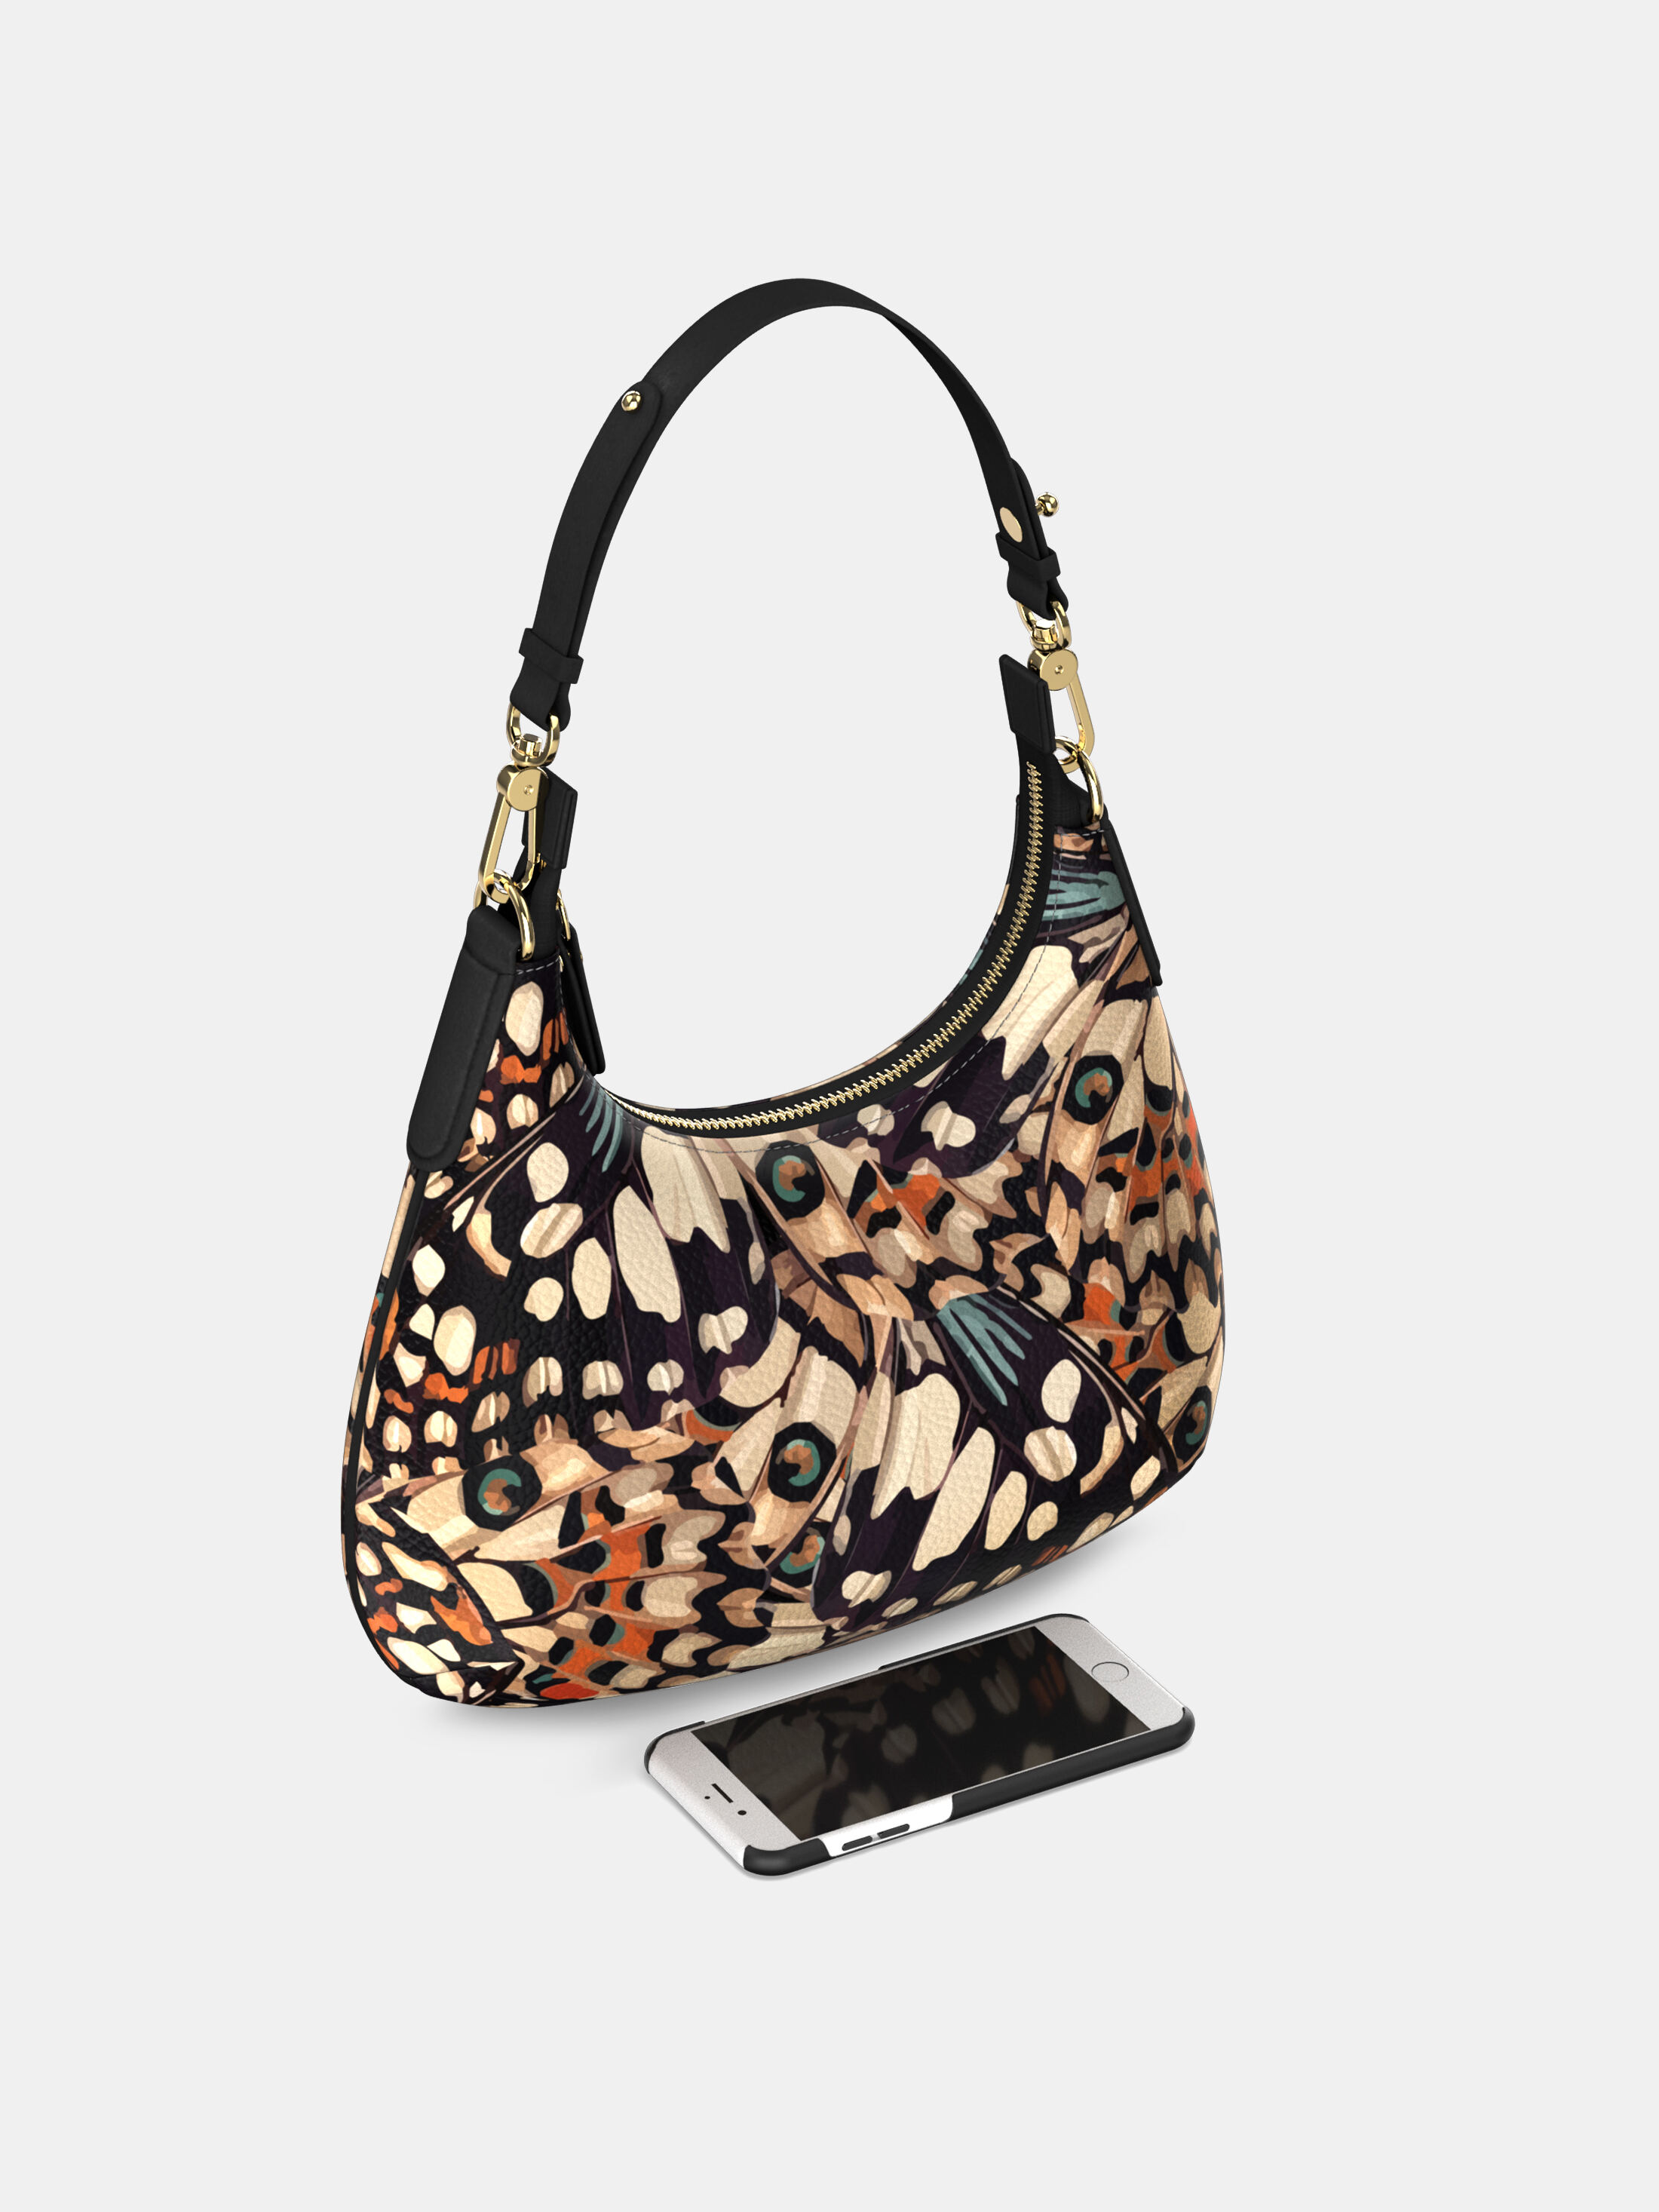 SOLD** Coach Pebble Leather Carrie Crossbody Bag | Lv handbags, Crossbody  bag, Purses crossbody